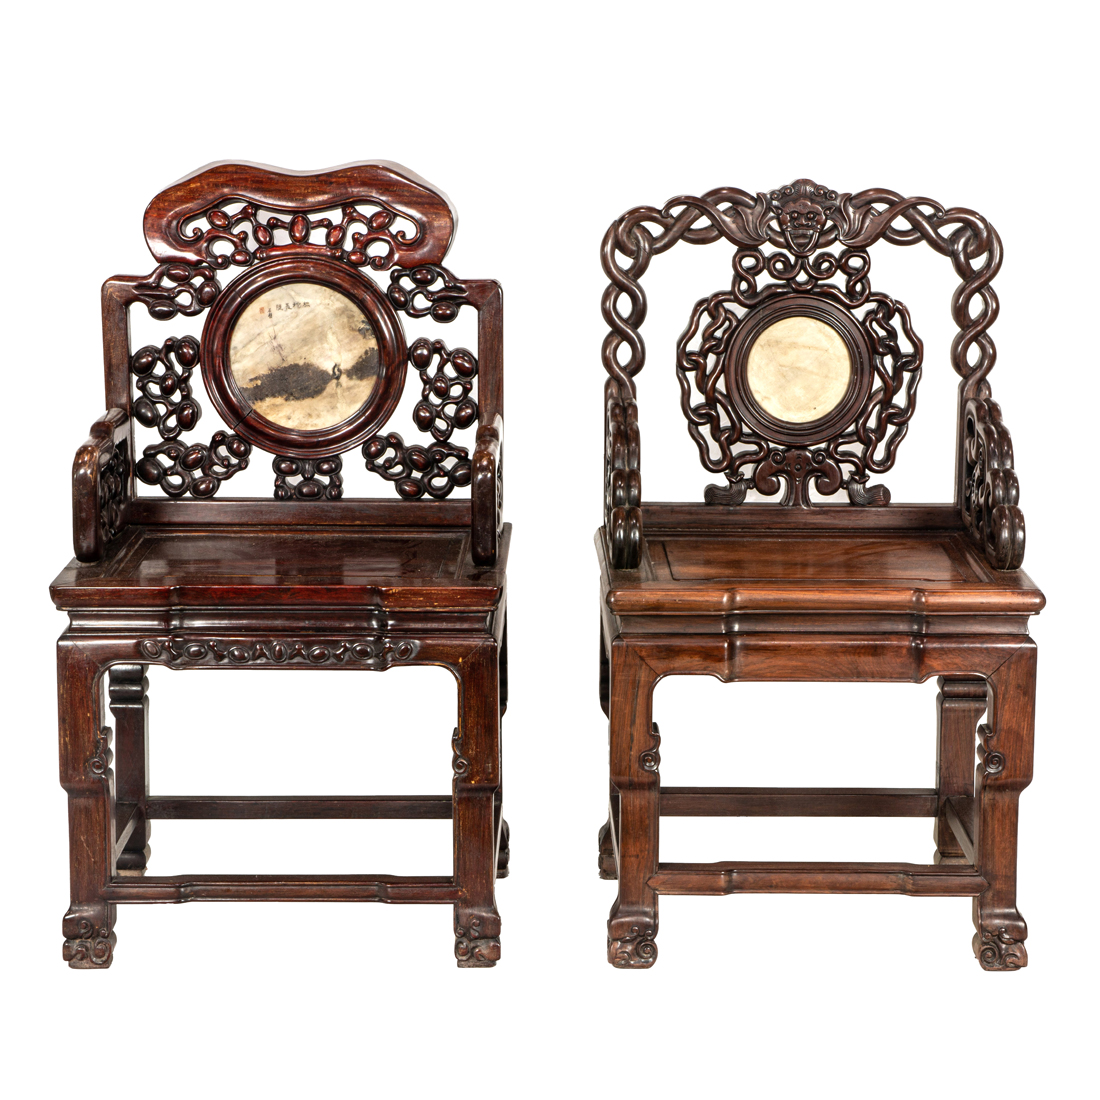 (LOT OF 2) CHINESE CARVED HARDWOOD